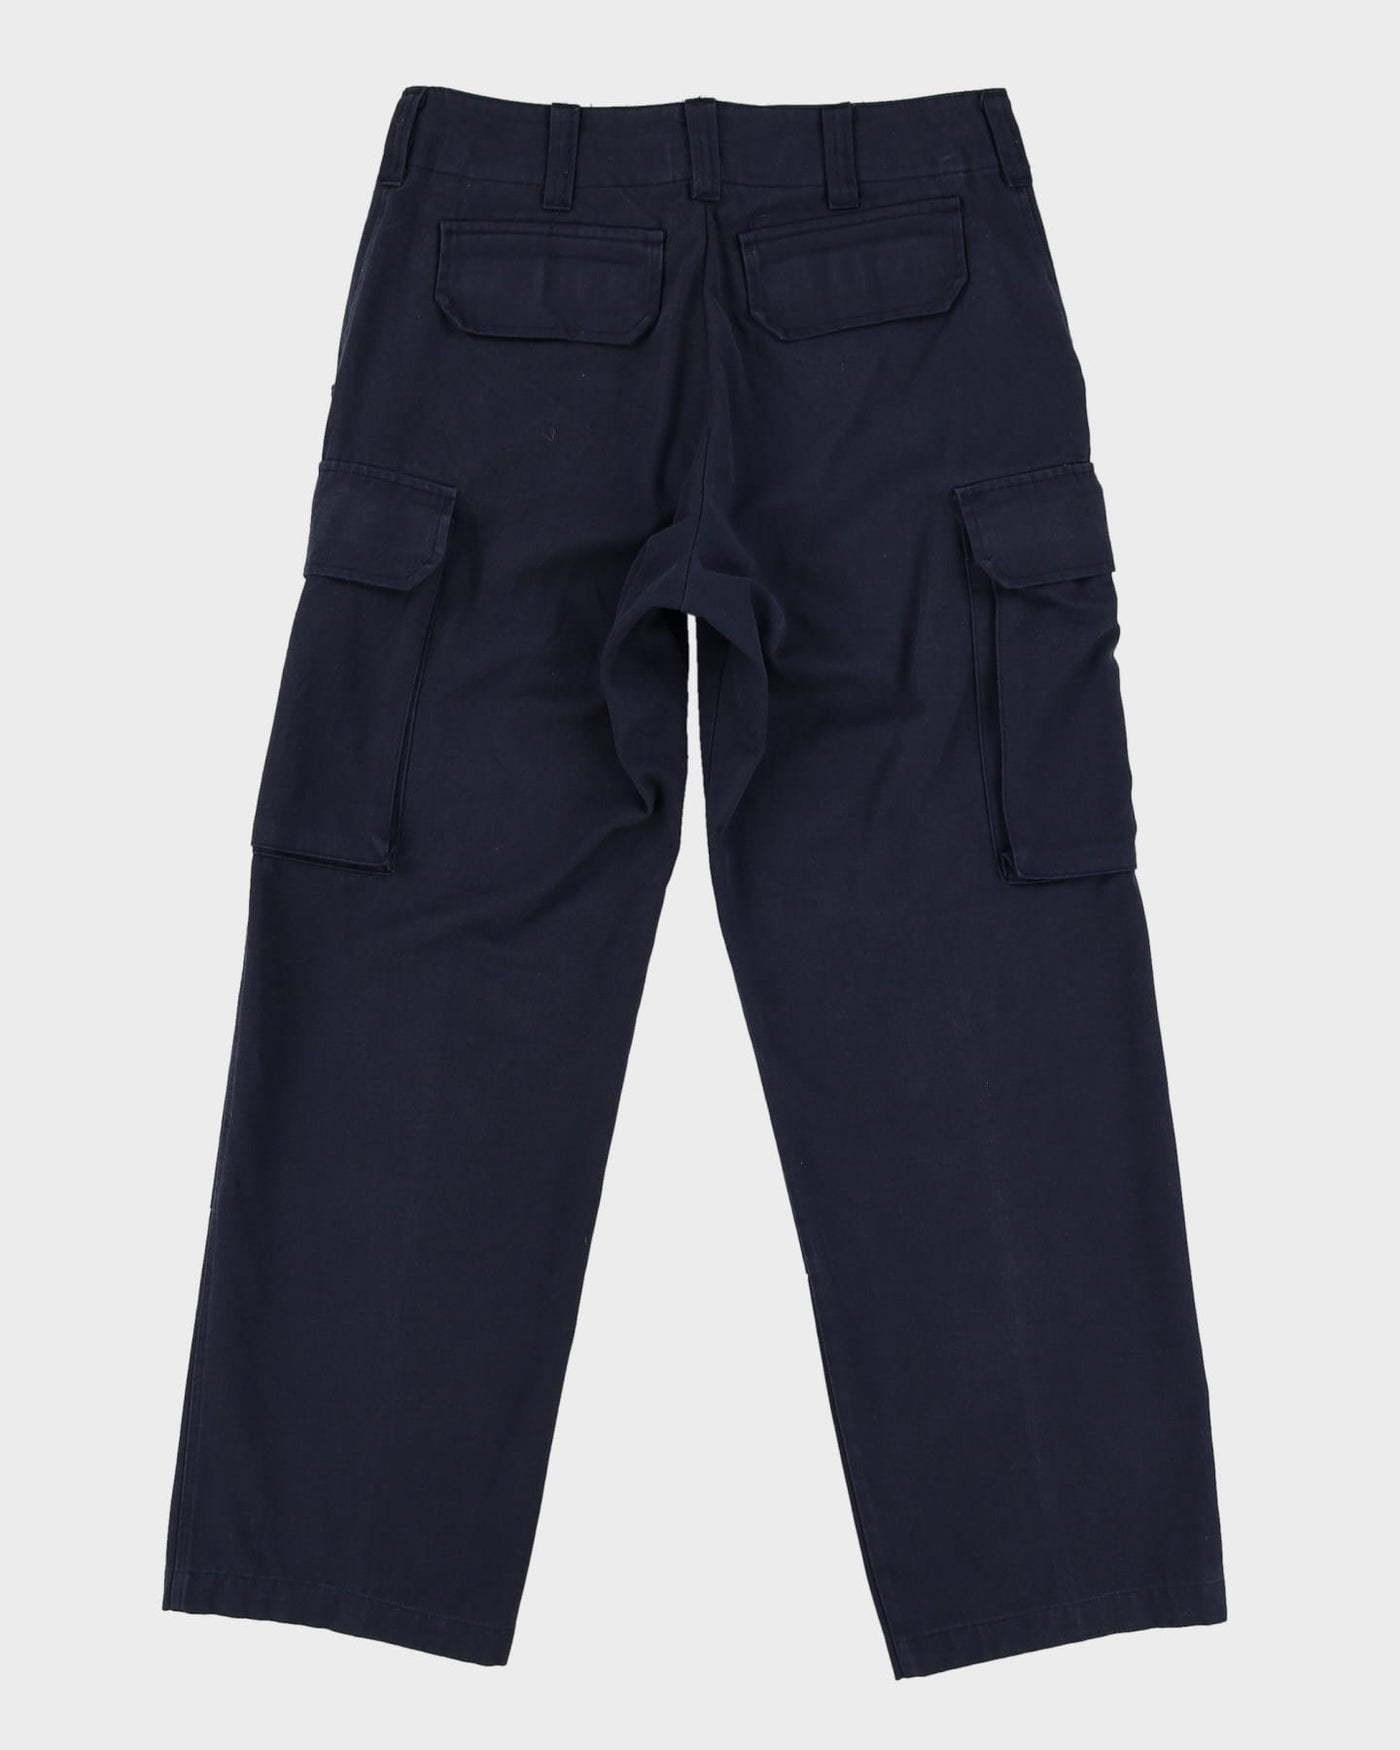 1990s Canadian Navy Blue Cargo Trousers - 32x31